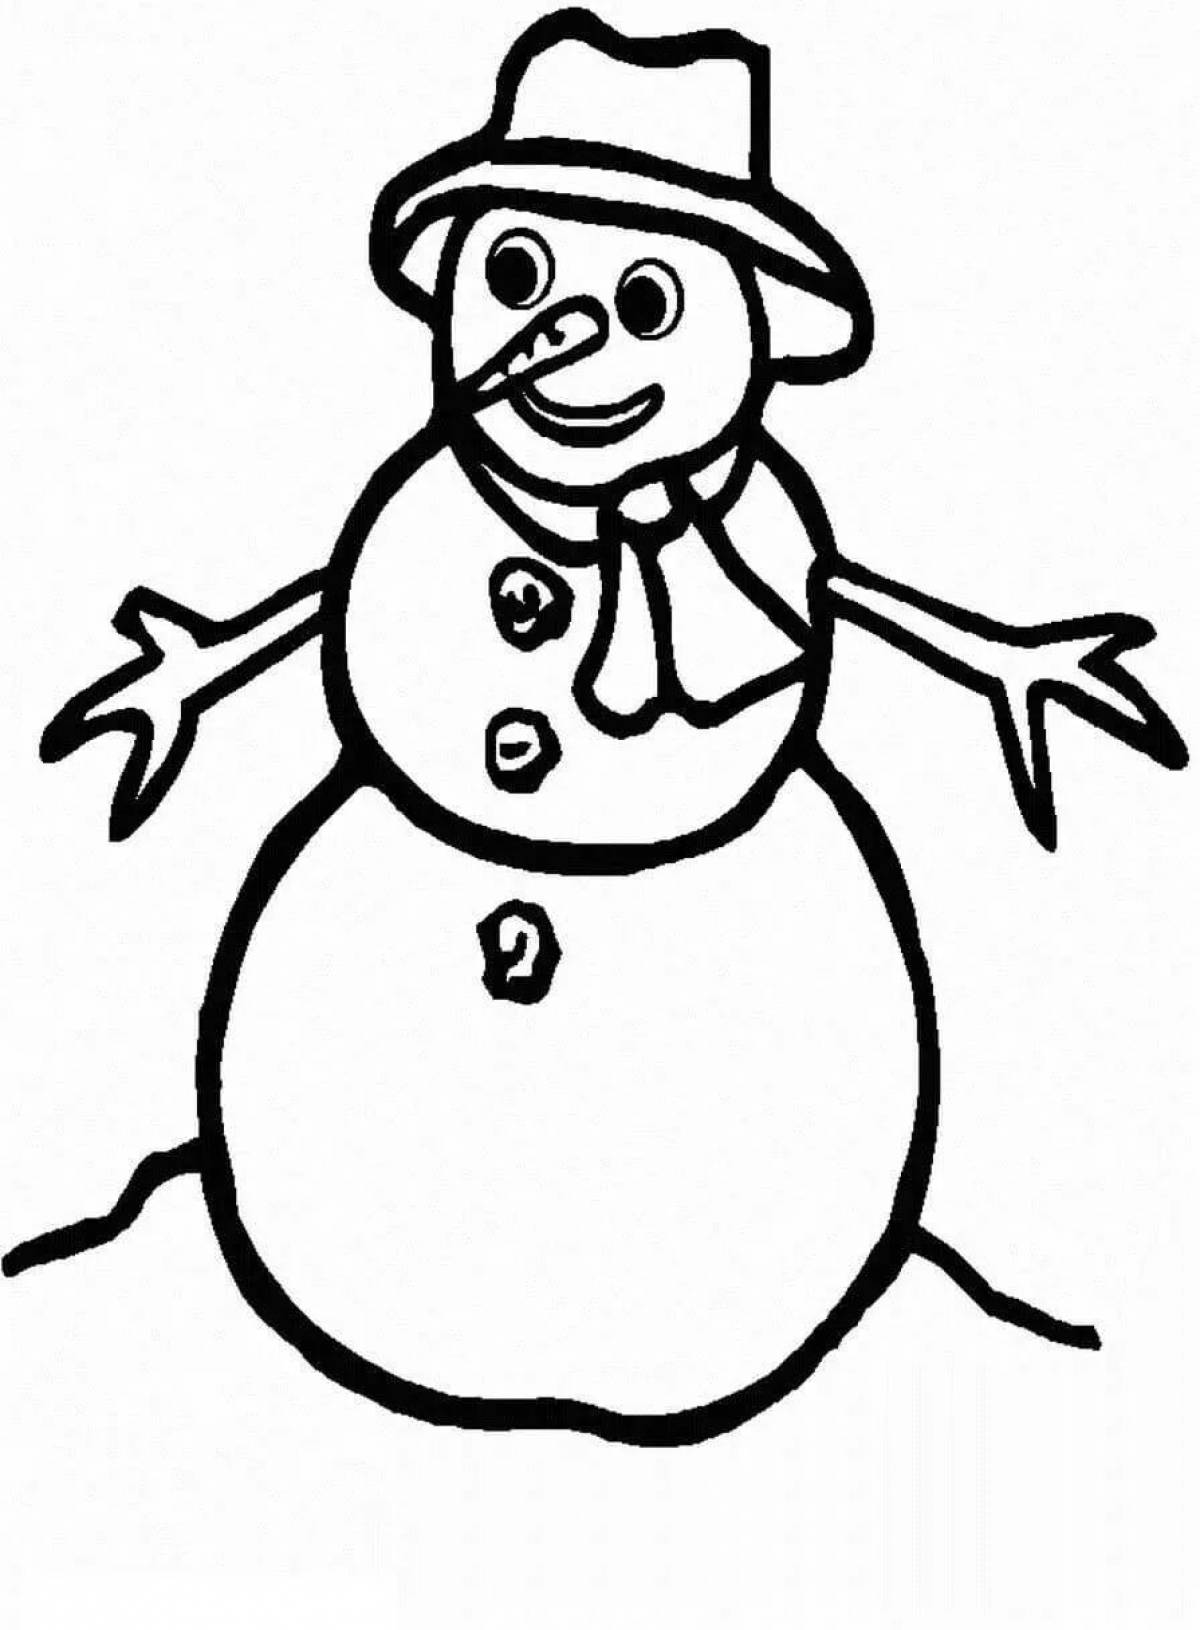 Snowman drawing for kids #5